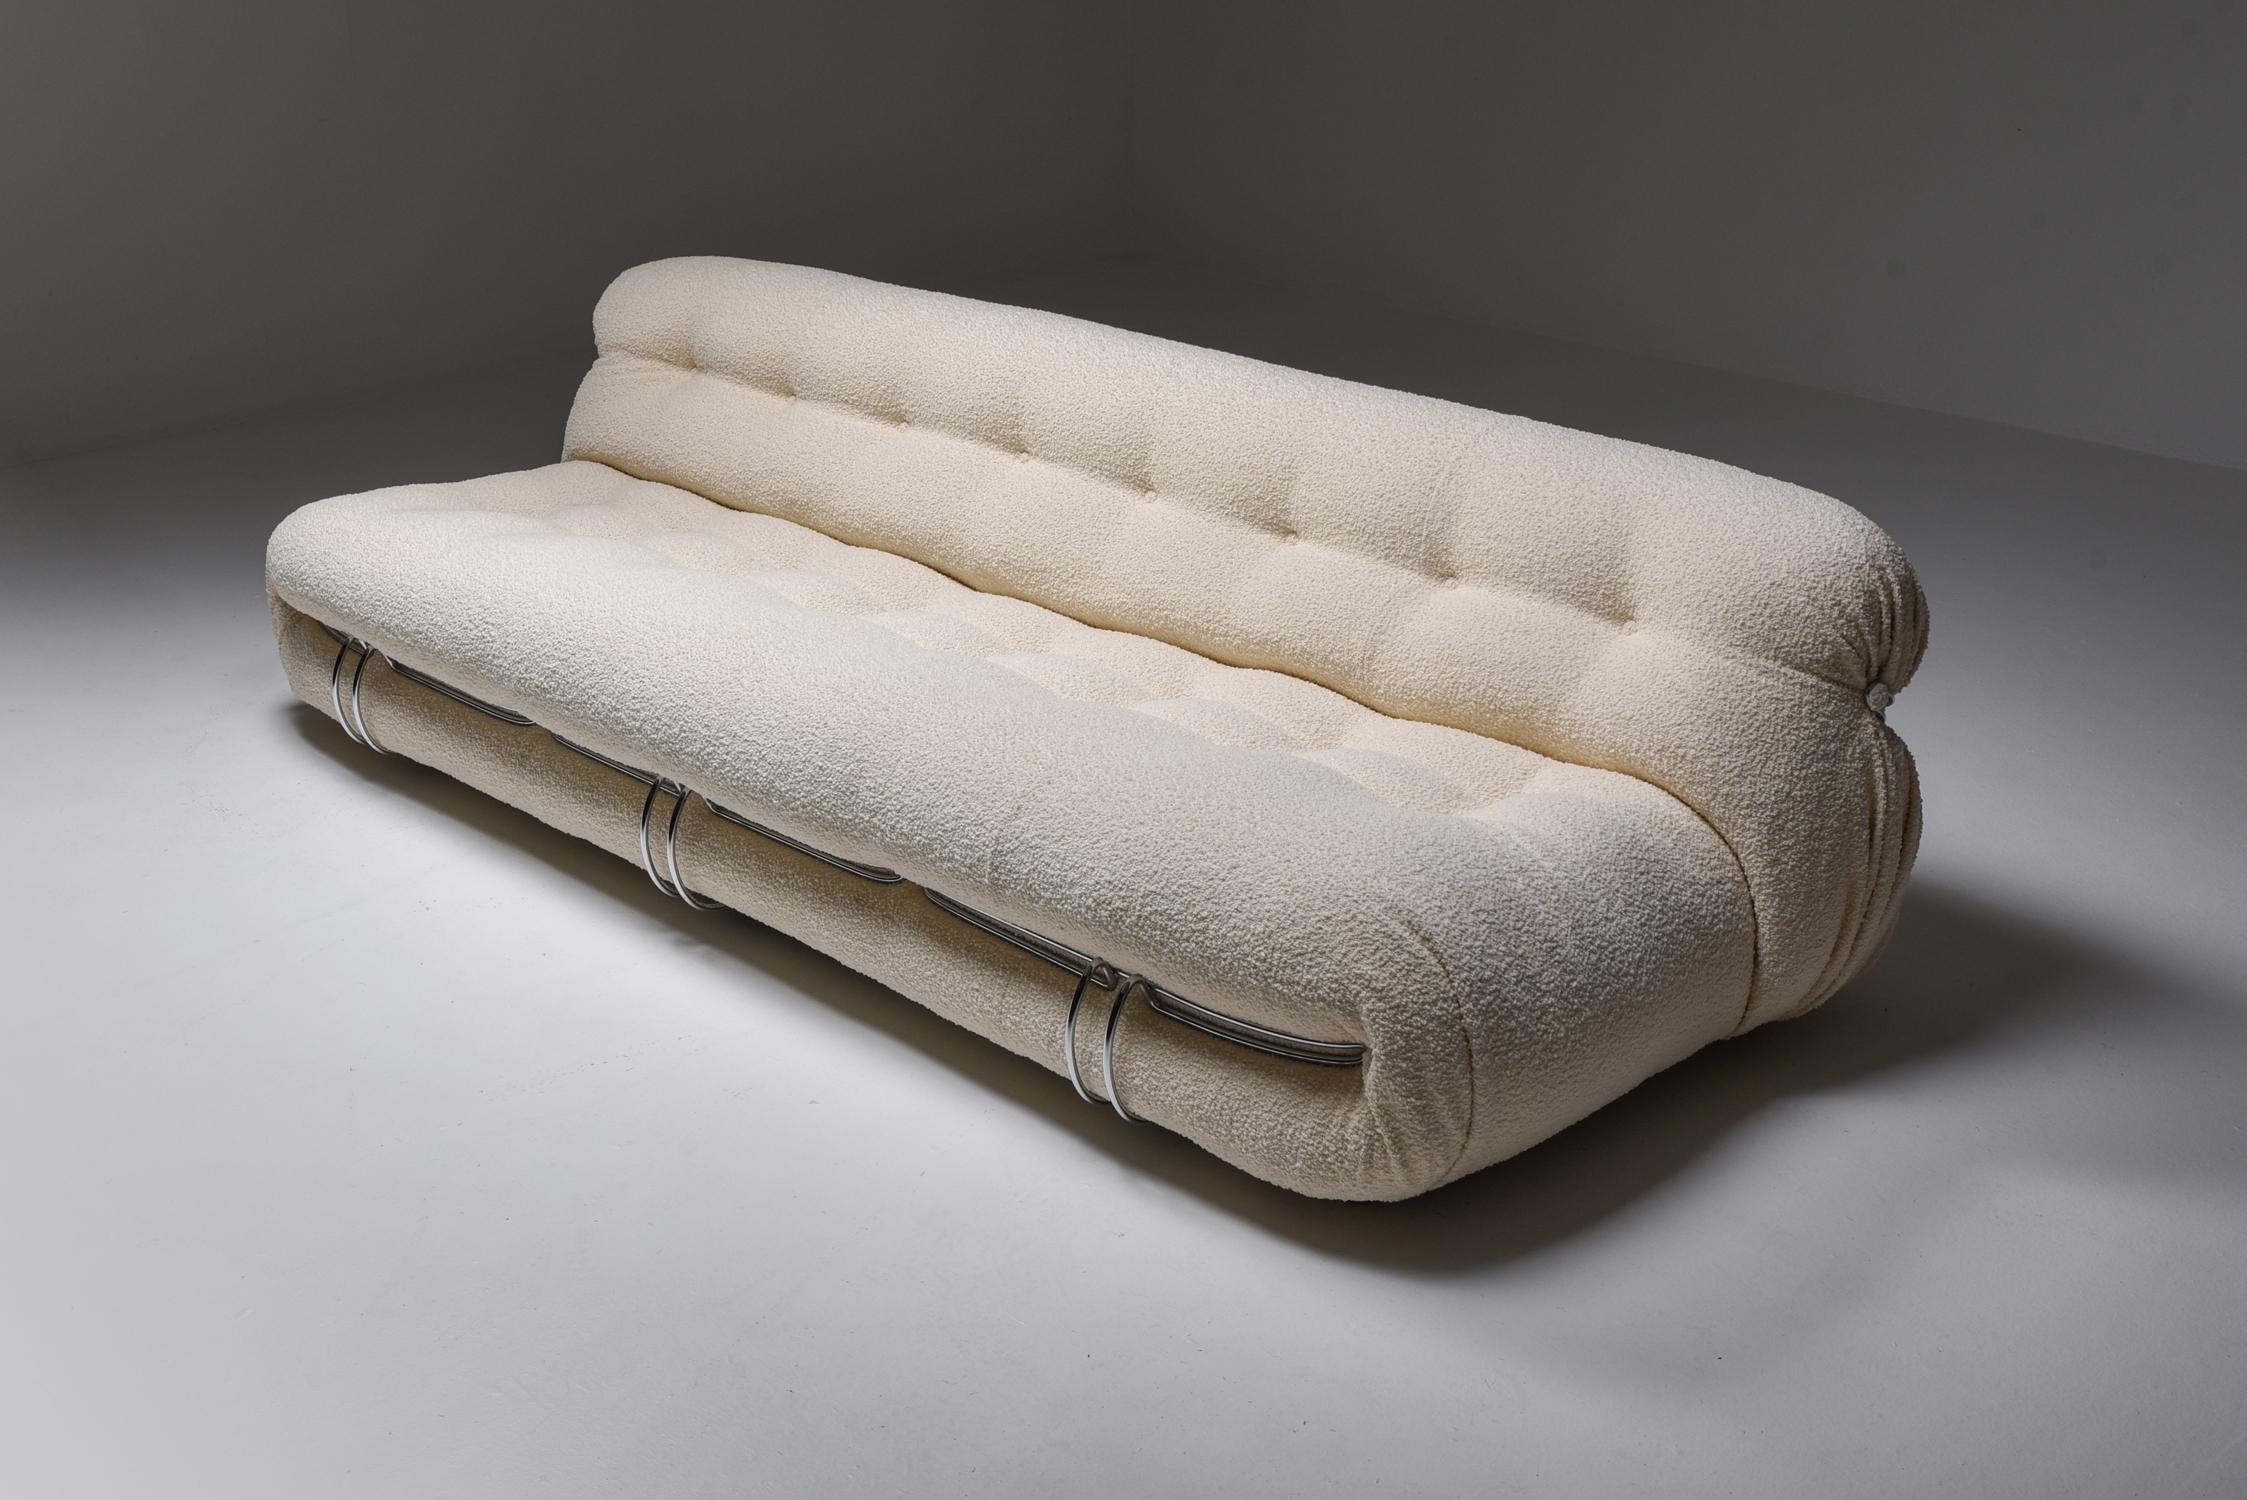 Cassina; Scarpa; Mid-Century Modern; Boucle Wool; Afra & Tobia Scarpa; Post-Modern; Postmodern Design; 1970s Design; Italy; Italian Design; 

Manufactured by Cassina in the 1970s, the Soriana collection was meant to express beauty and comfort by